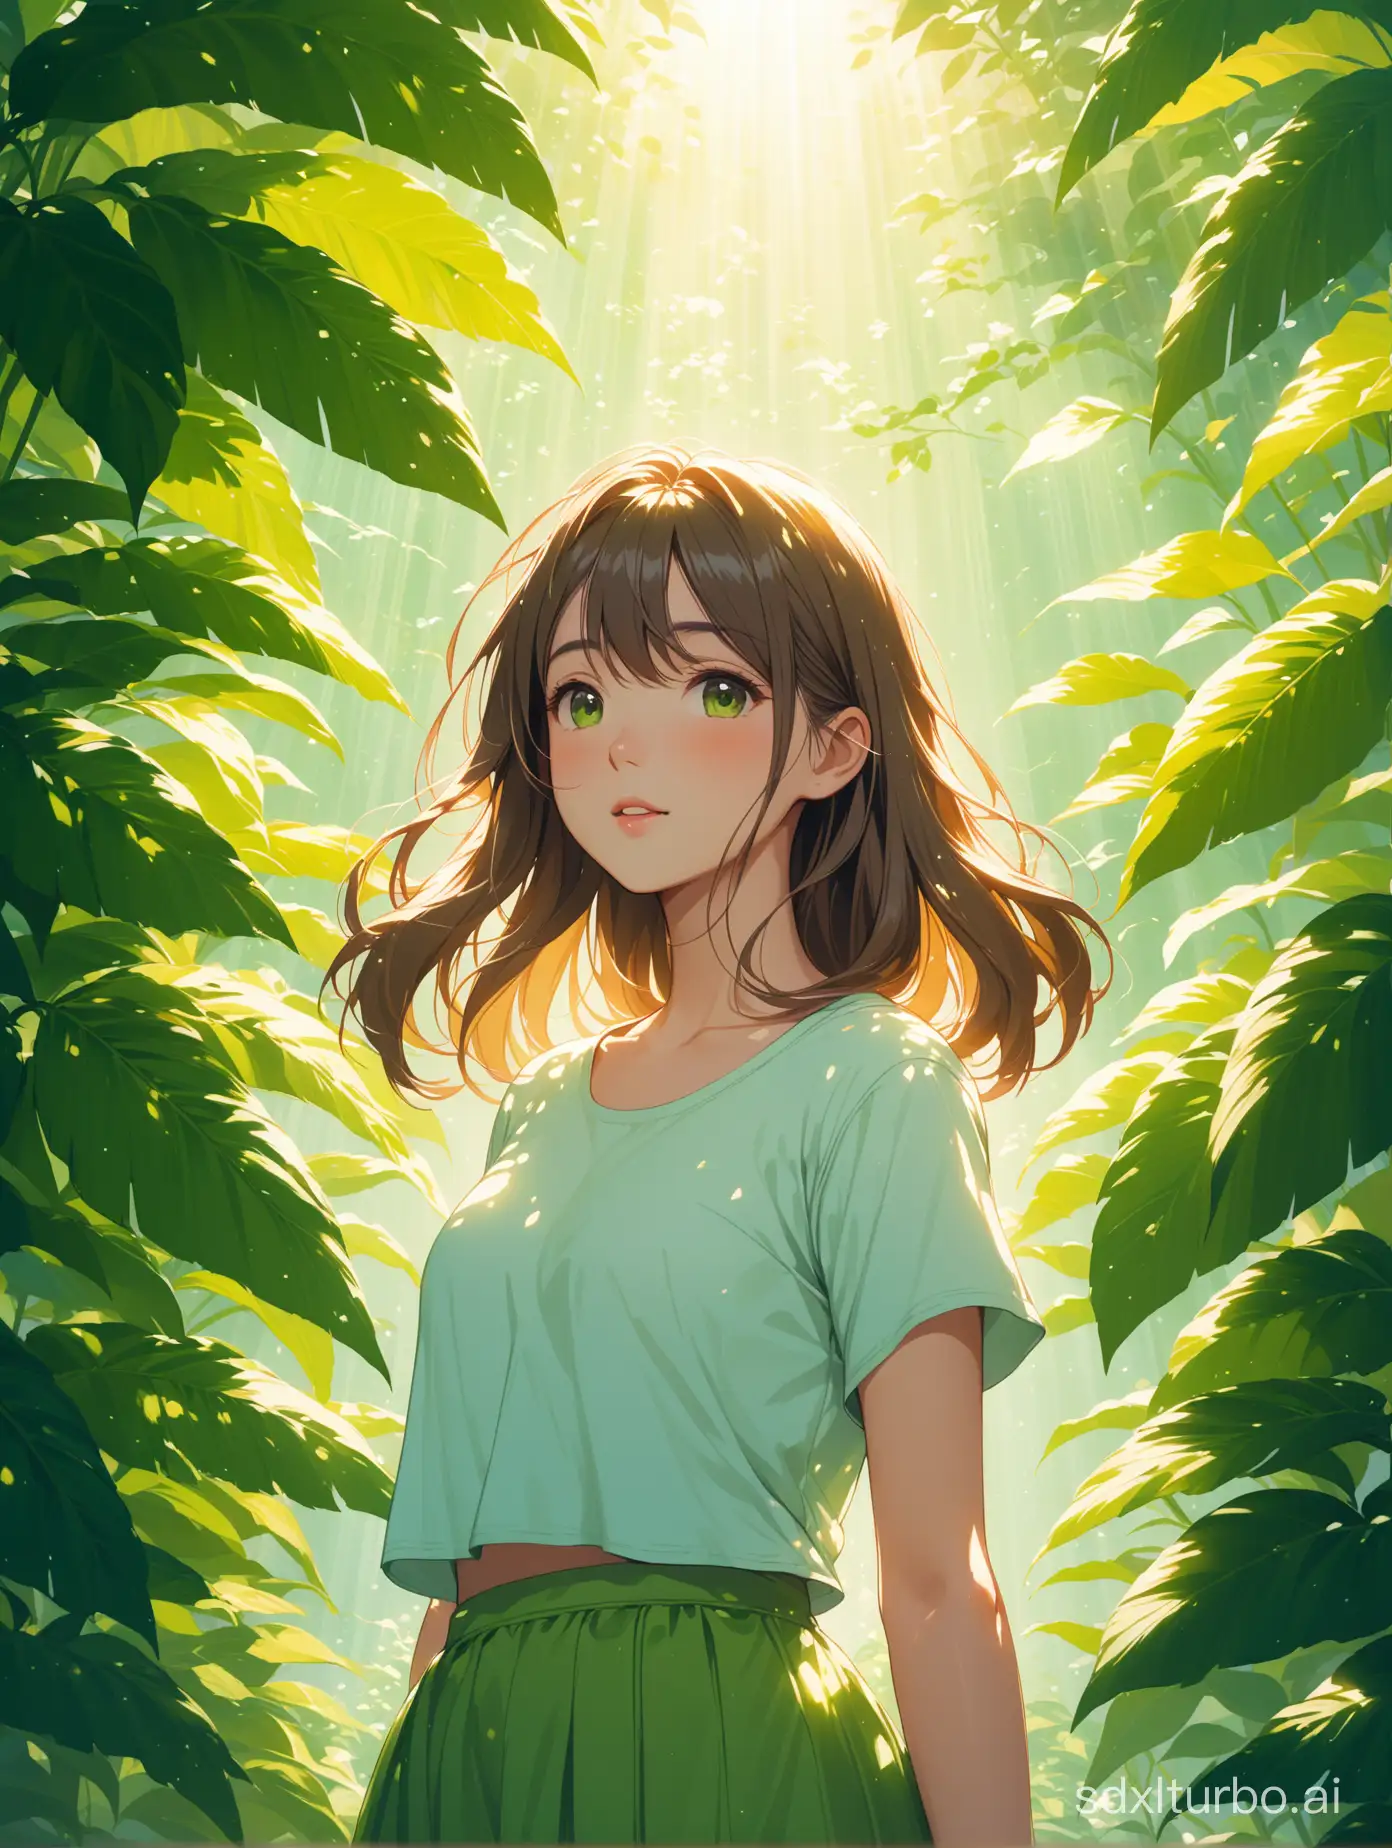 A playful girl in a half-body portrait, standing in a garden with her hands behind her back, wearing a summer outfit with a skirt and T-shirt, her hair gently blowing in the breeze, surrounded by a variety of flowers and green plants, sunlight filtering through the leaves creating beautiful light patterns on her, masterpiece, best quality, 4k, illustration style, best lighting, depth of field, detailed character, detailed environment.